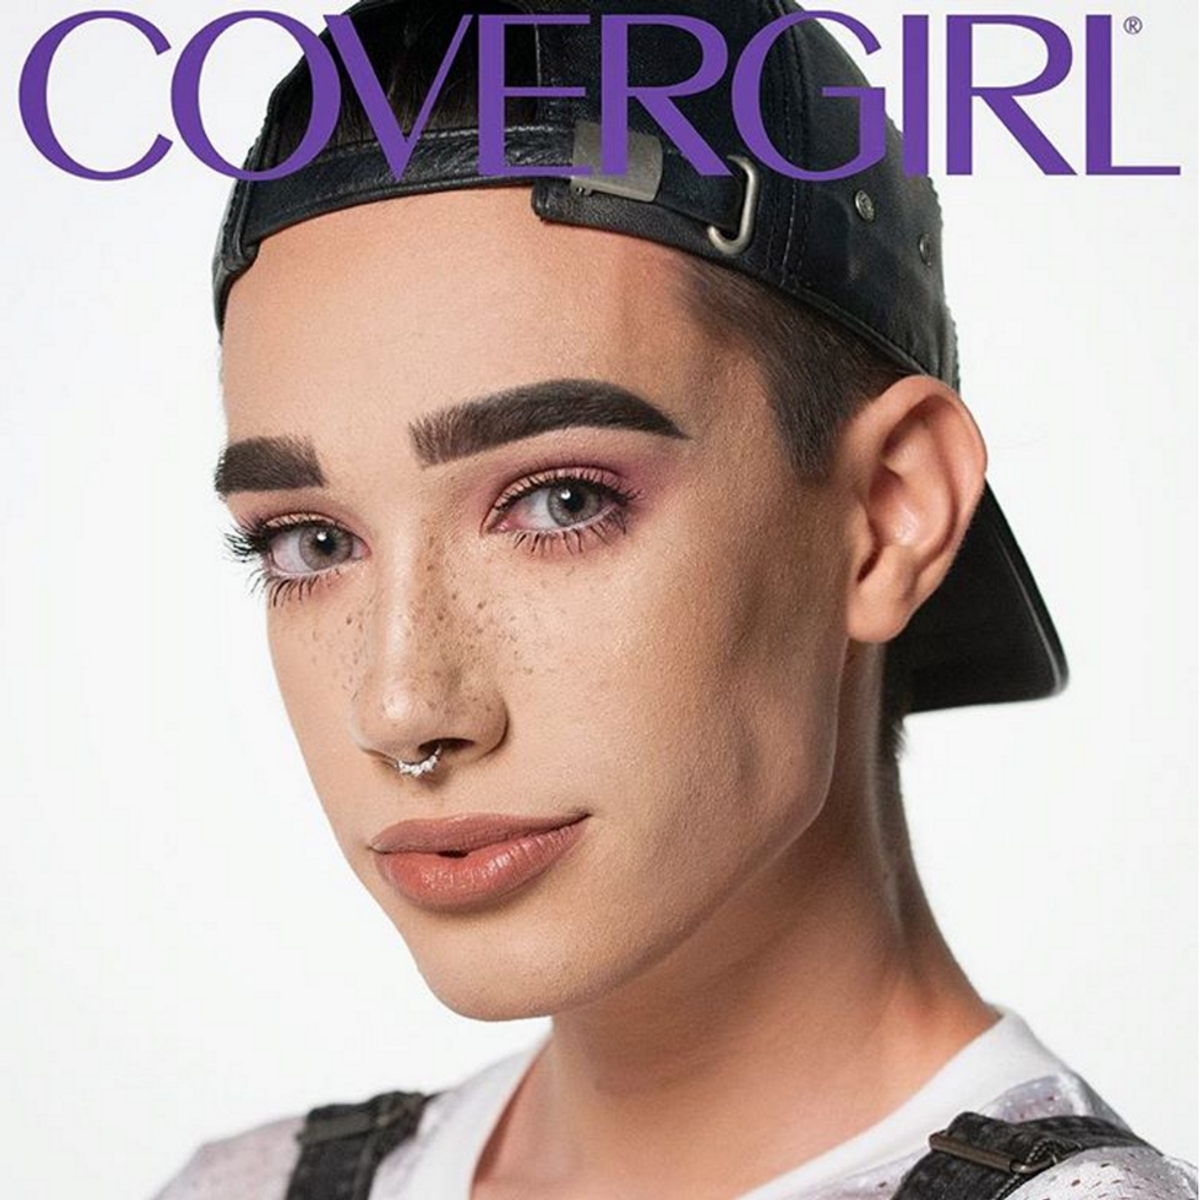 Covergirl Makes History With First Coverboy